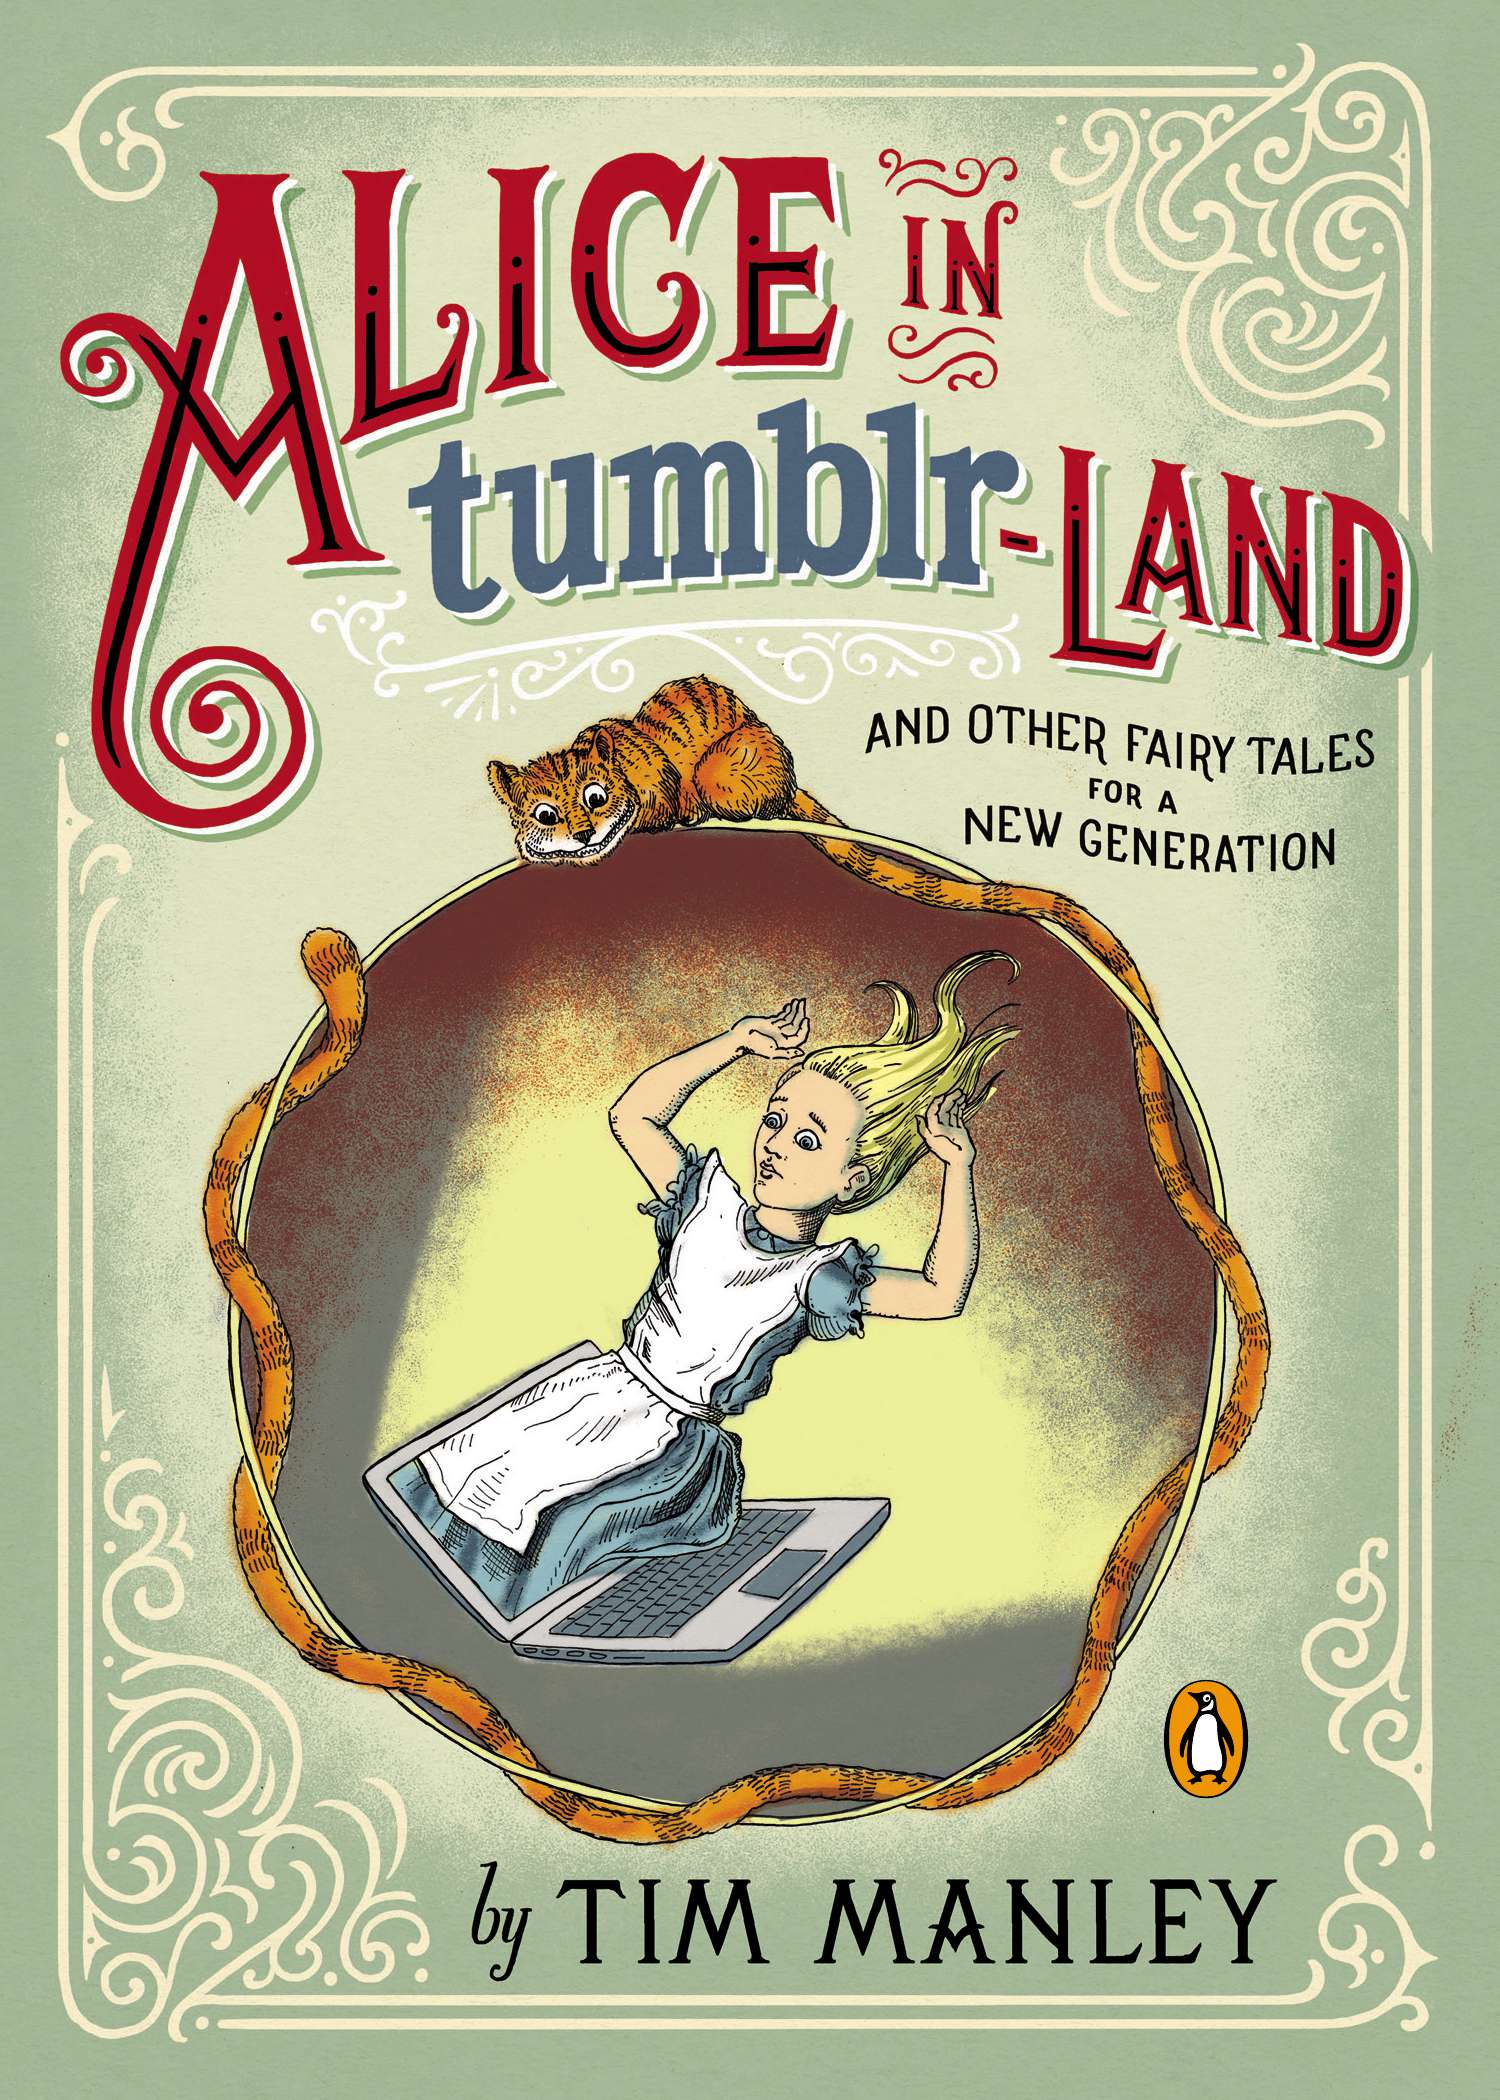 Book Launch: Alice in Tumblr-land by Tim Manley, with Erin Barker, Tara Clancy, and Jen Lee